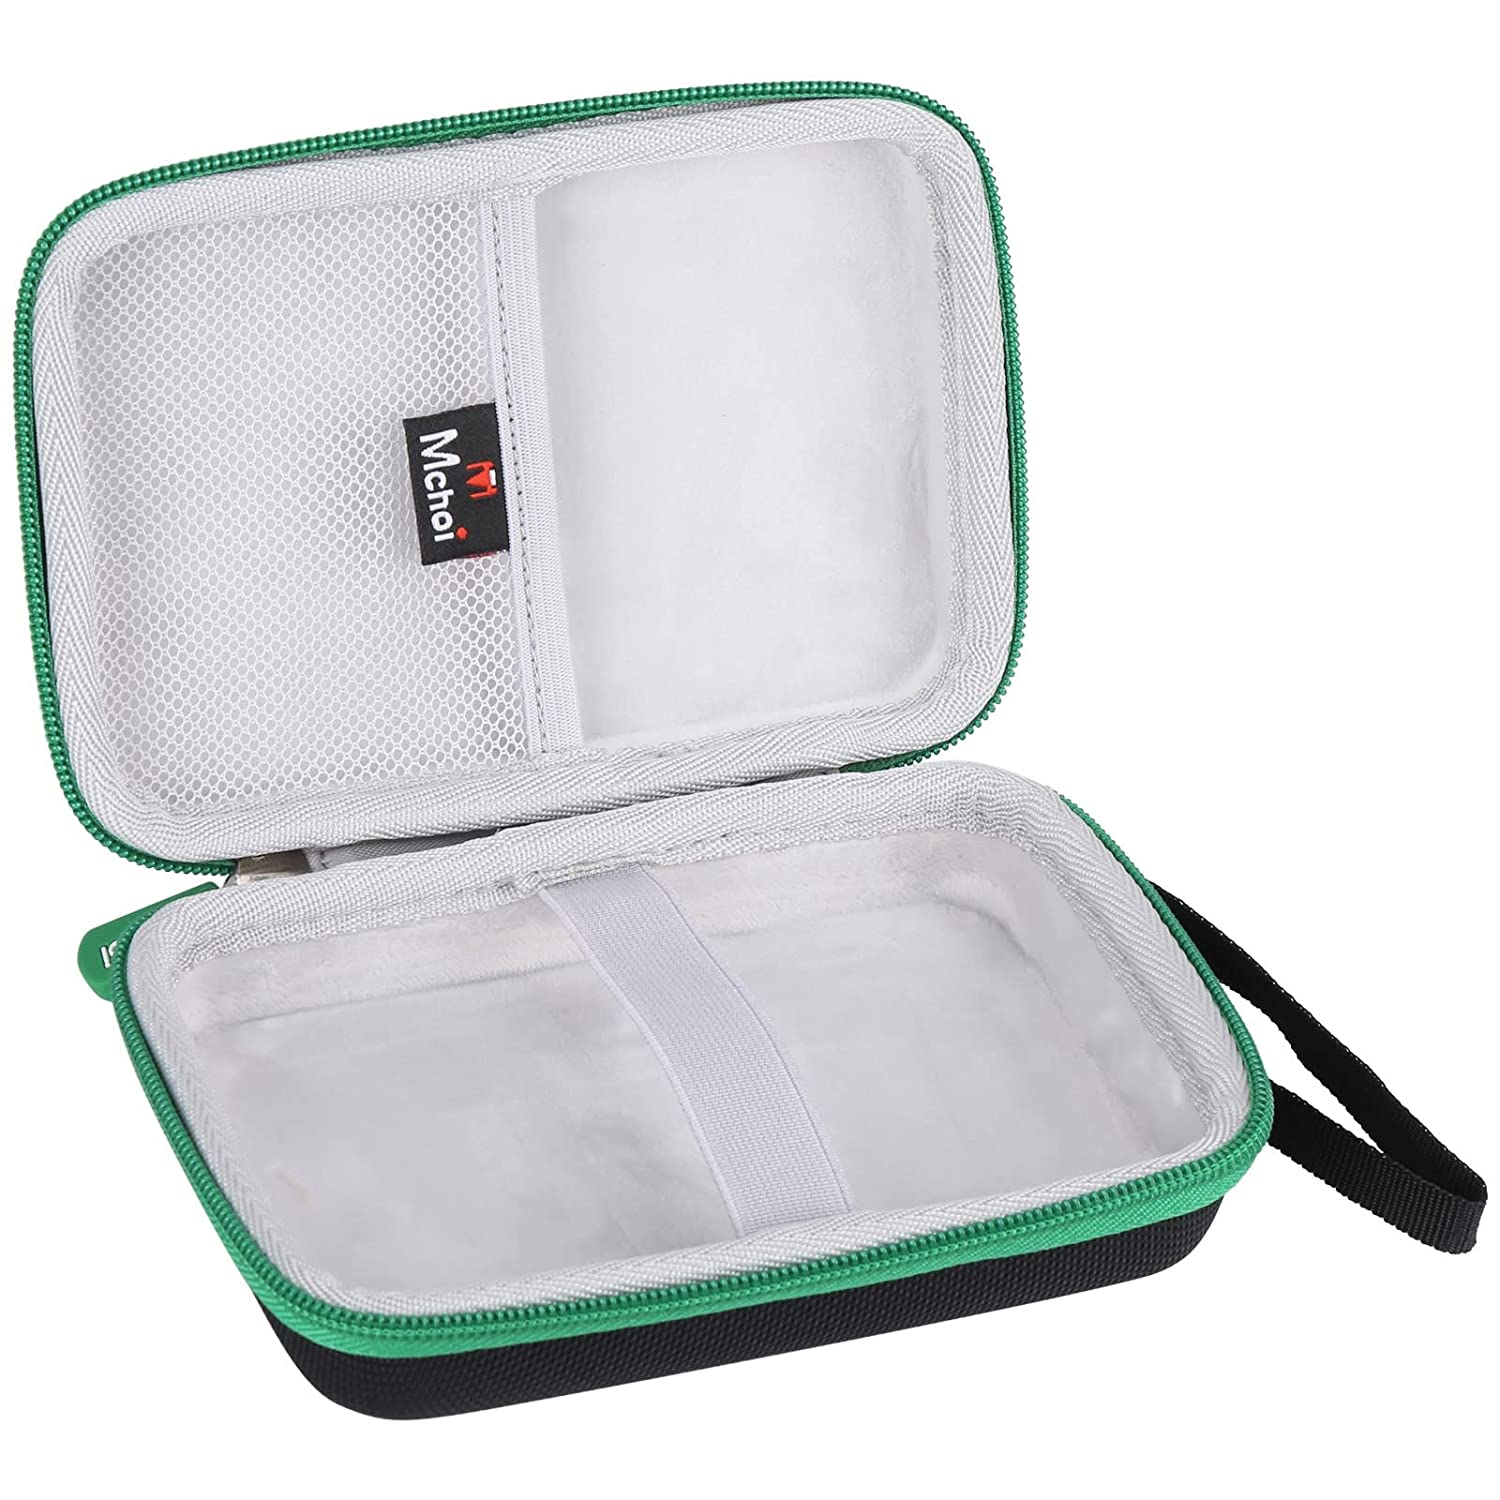 Mchoi Shockproof Carrying Case